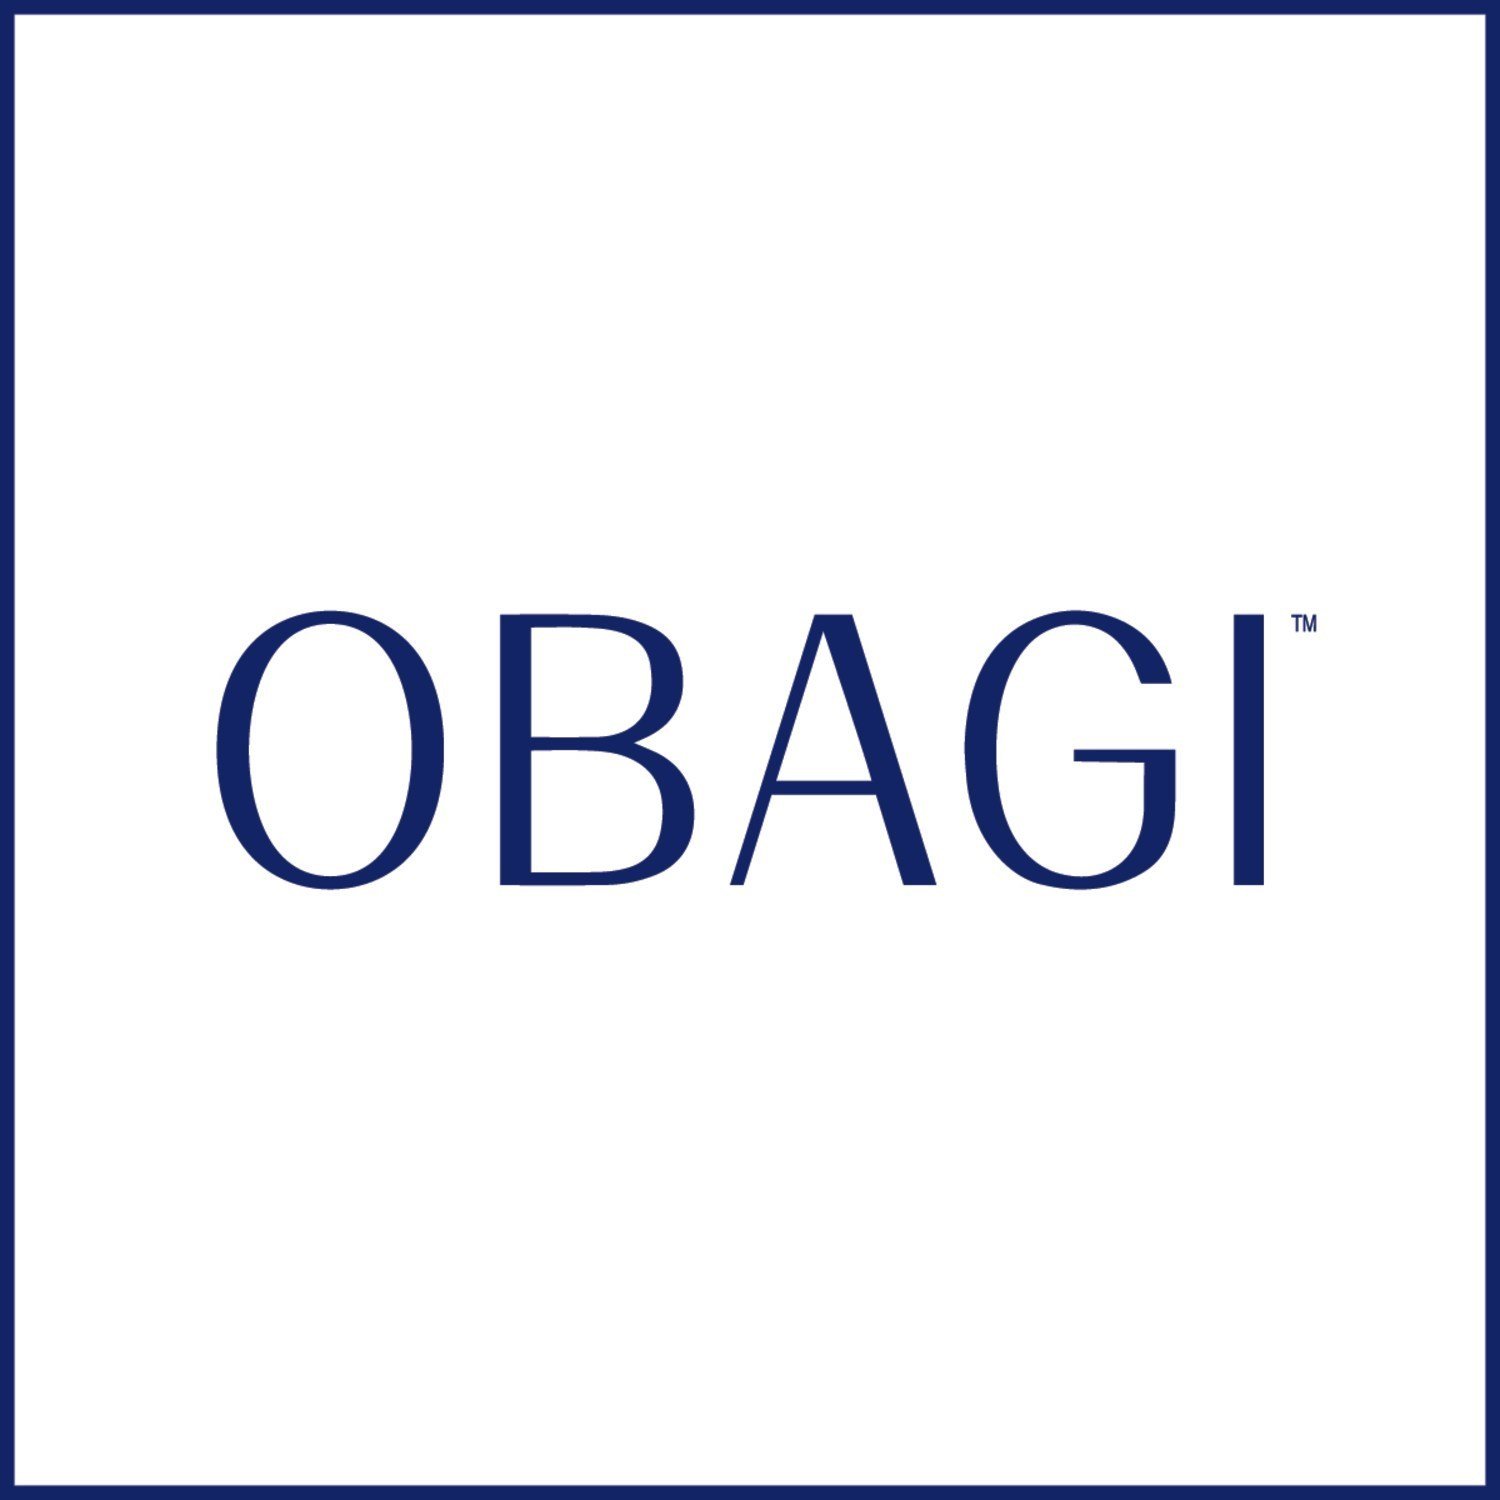 Obagi Review: A Review of The 10 Best Obagi Skin Care Products